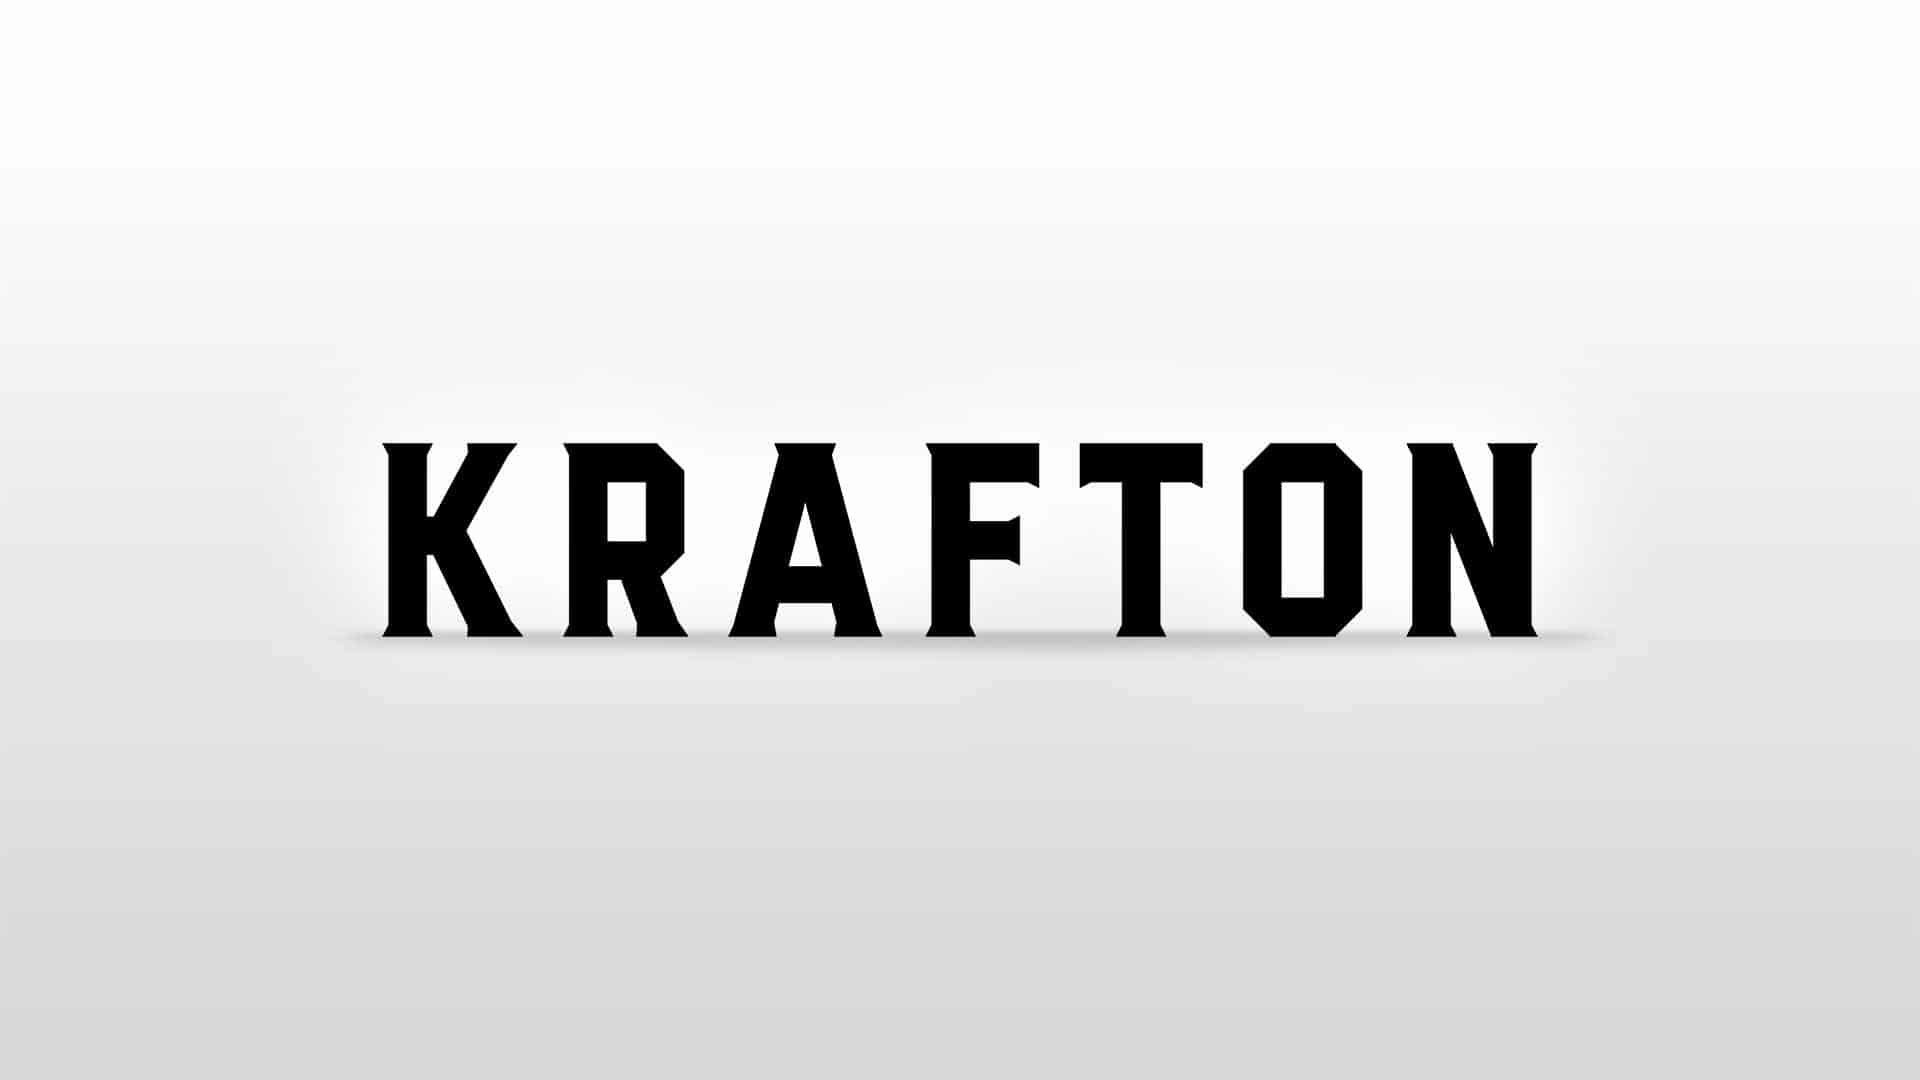 Crafton plans to “expand a strong game-based IP” in 2023 –